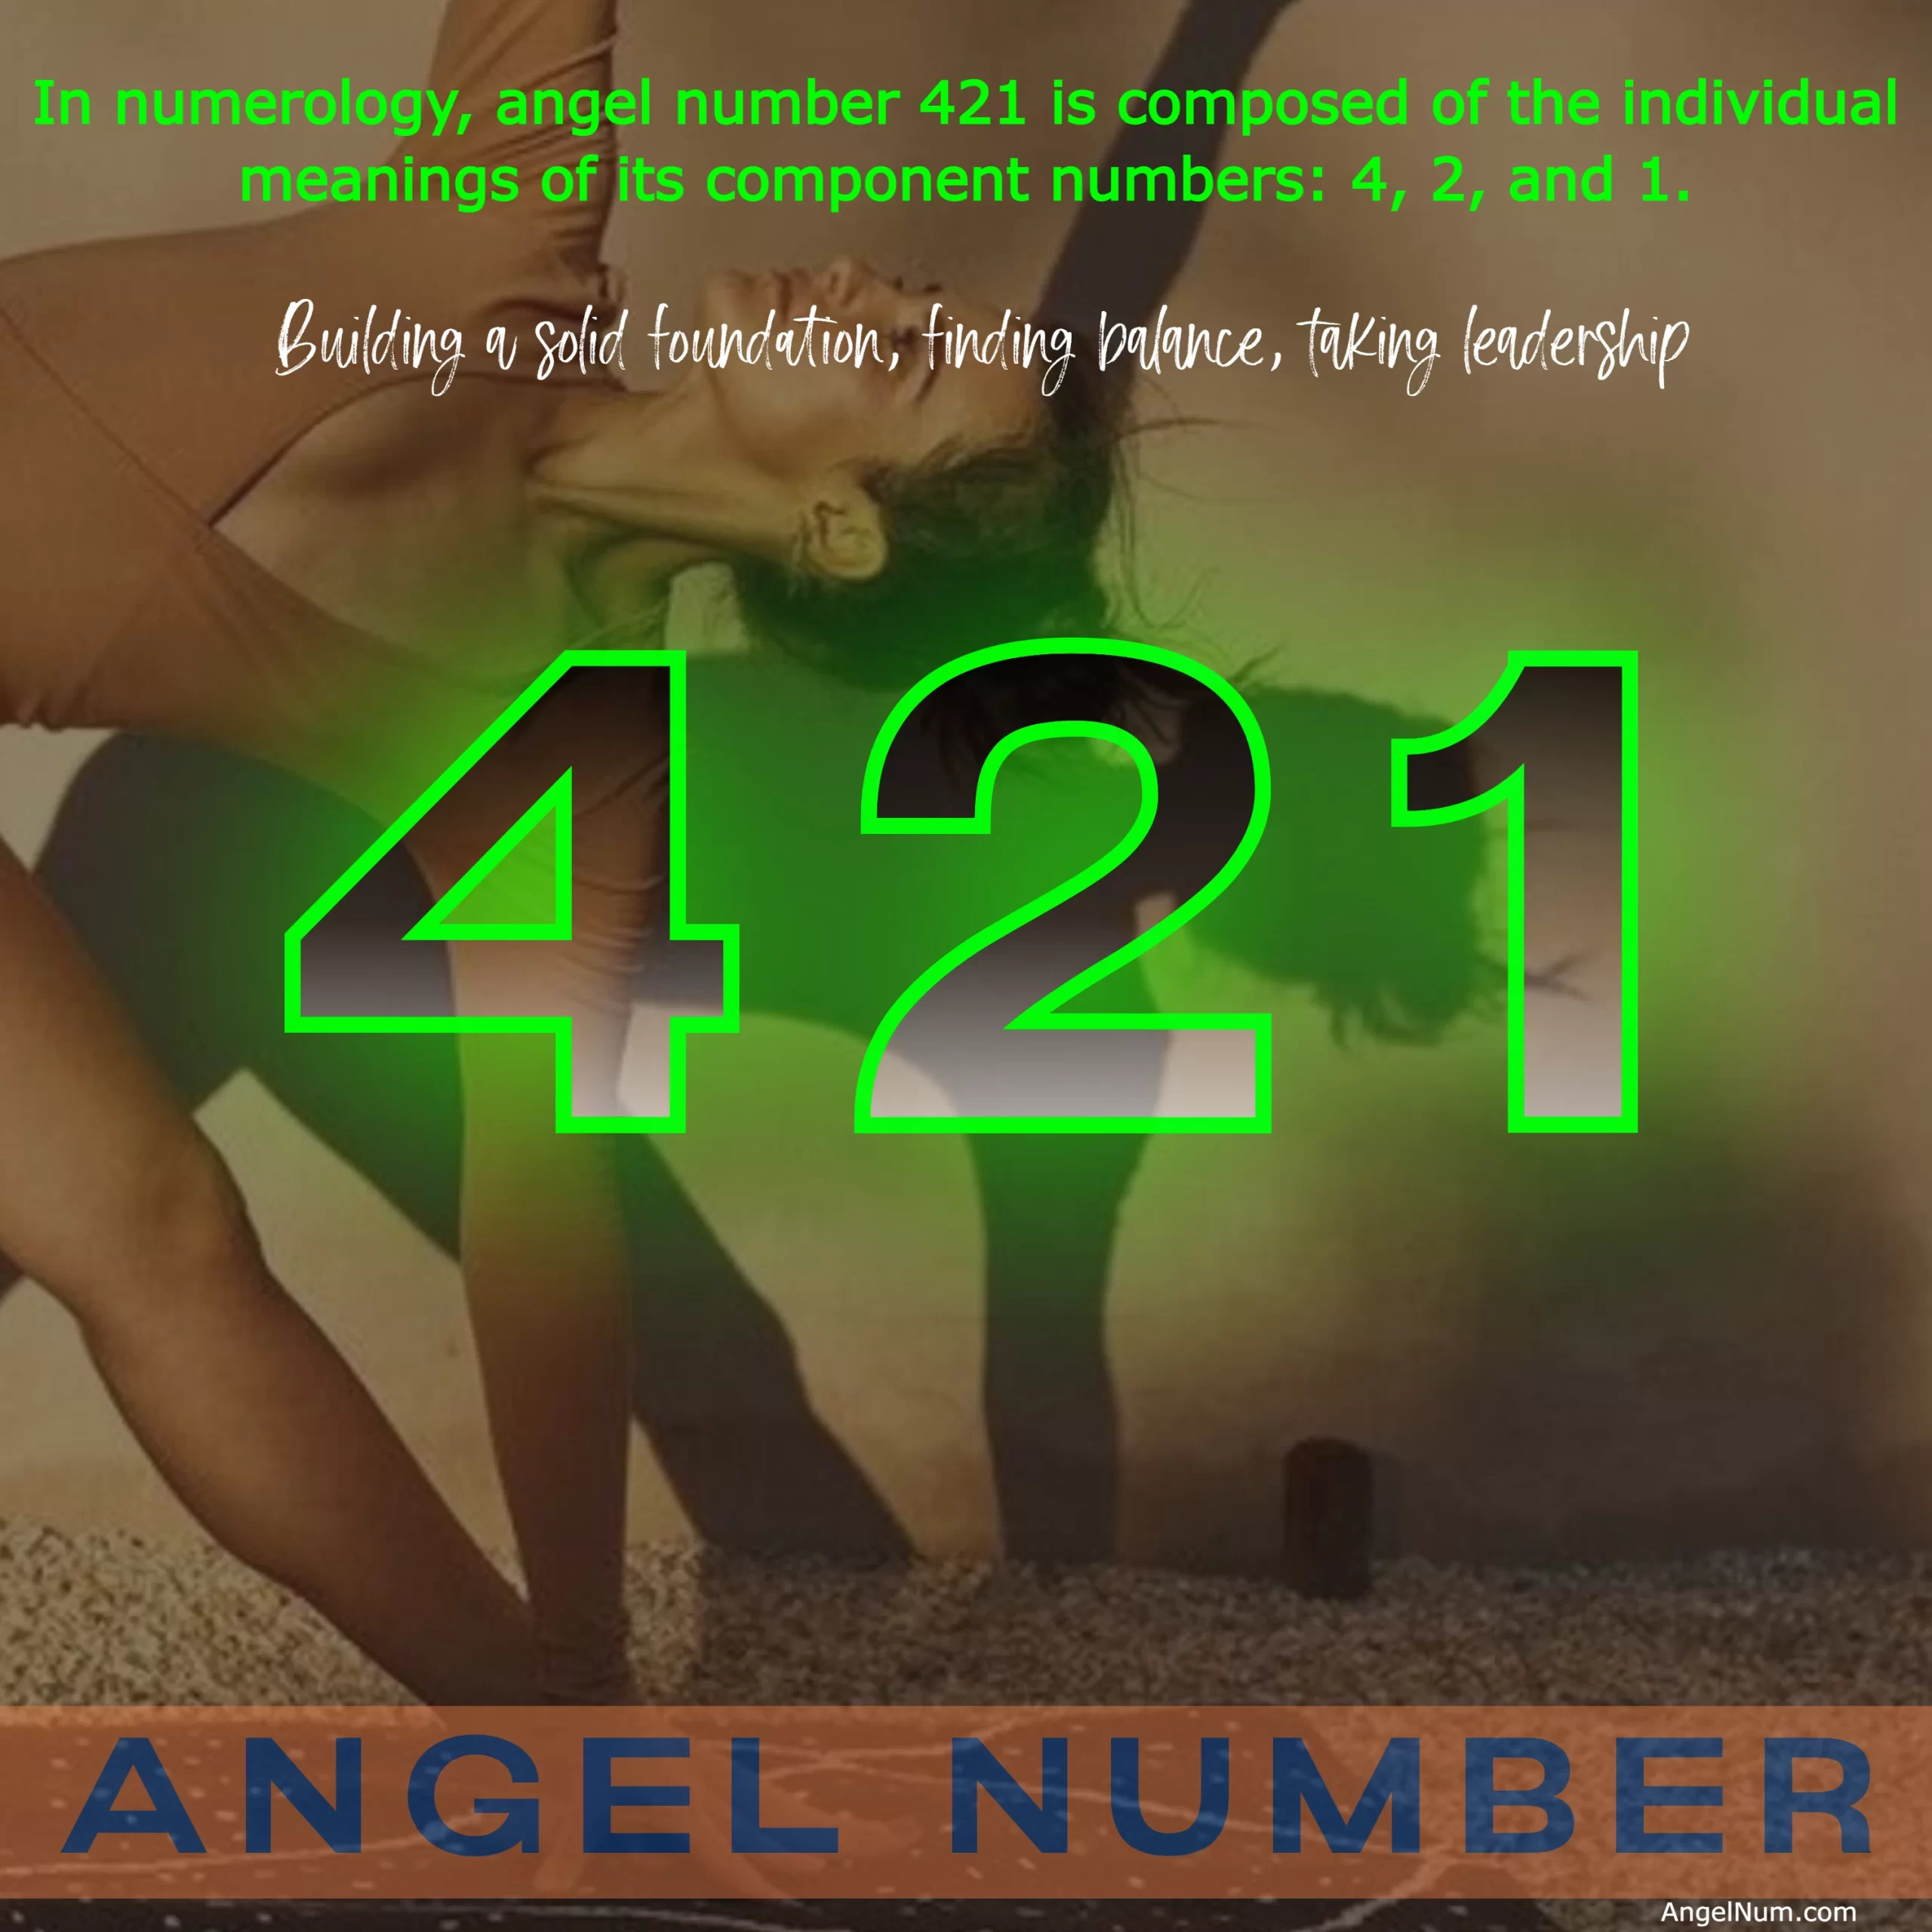 Cracking the Code: The Meaning of Angel Number 421